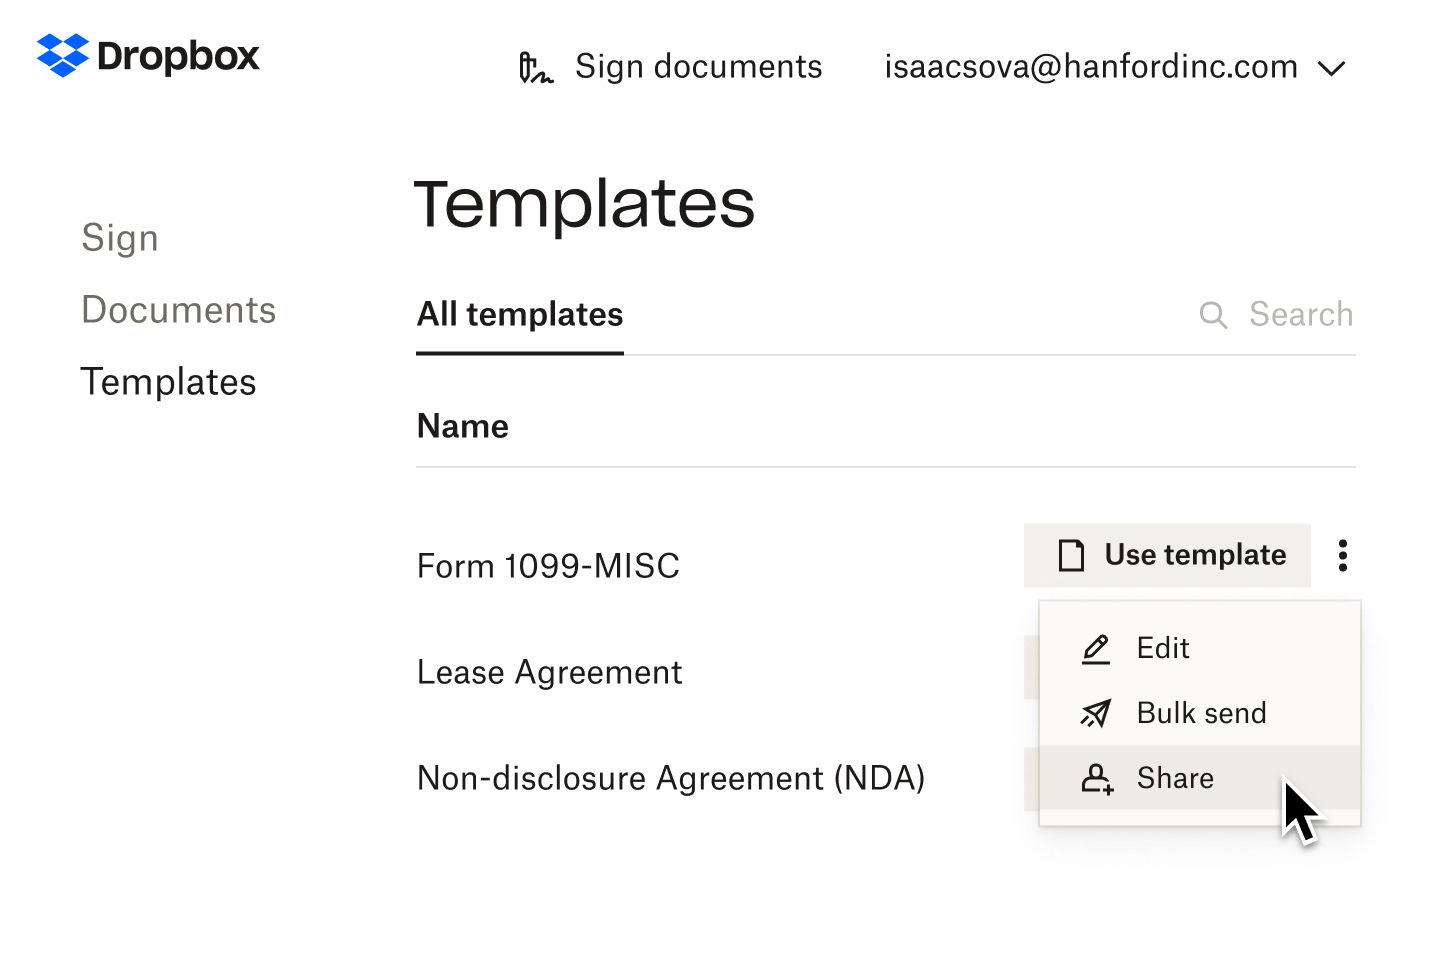 A user selecting ‘Share’ in the ‘Use template’ drop-down for a 1099-MISC form template